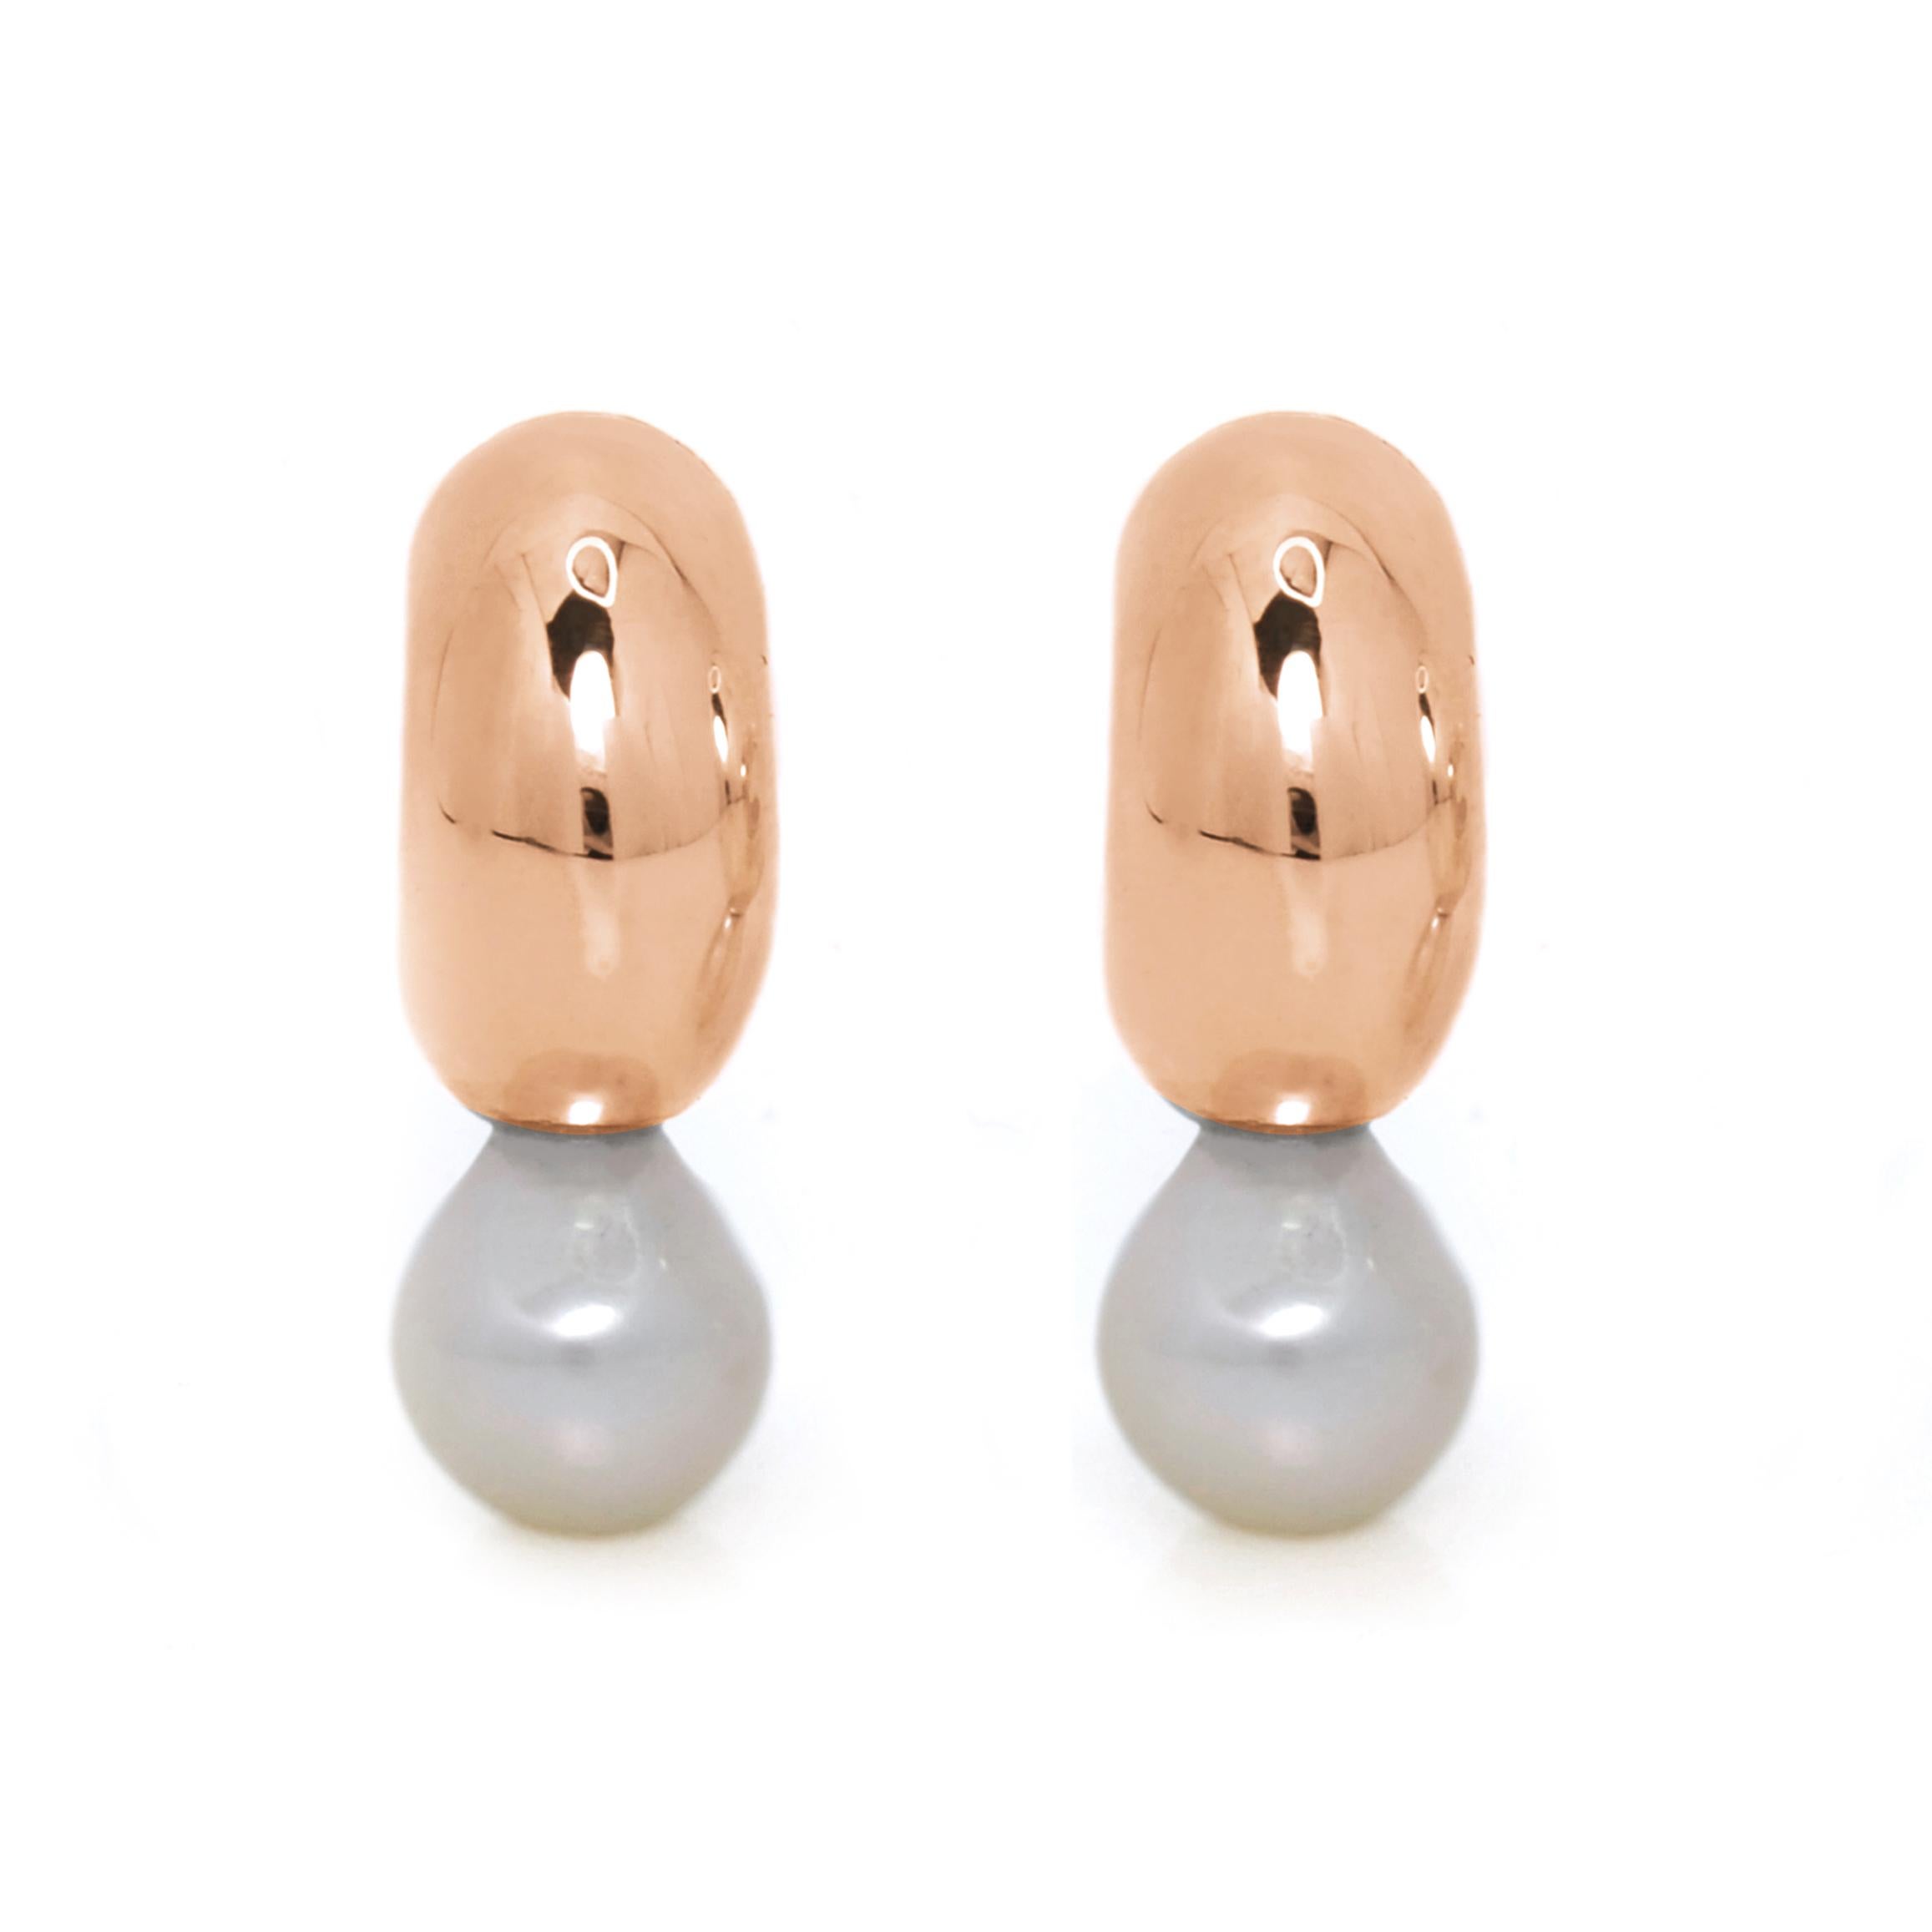 The Melu Huggies, fresh water pearl hoop earrings featuring tear drop pearls in a design that calls to mind the mysterious and mystical sirens of folklore.

Meticulously handcrafted from sterling silver. Pearls may vary slightly in shape and luster